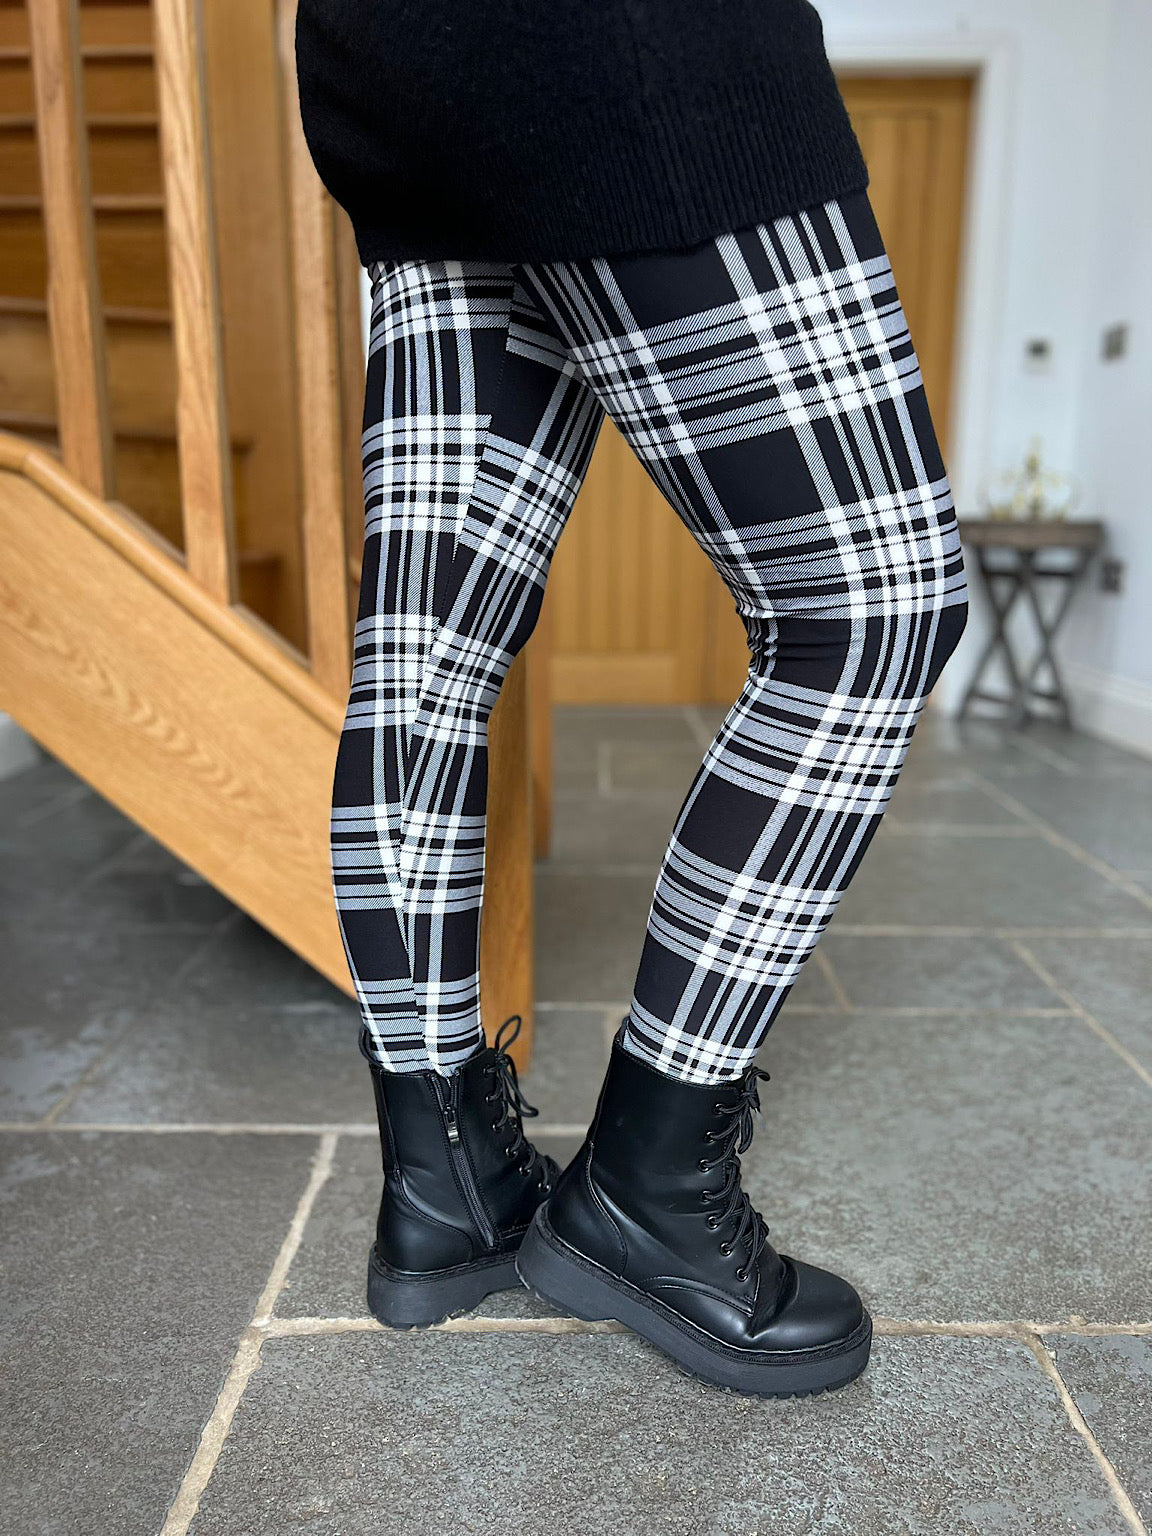 New Arrivals | Plaid leggings outfit, Plaid fashion, Outfits with leggings